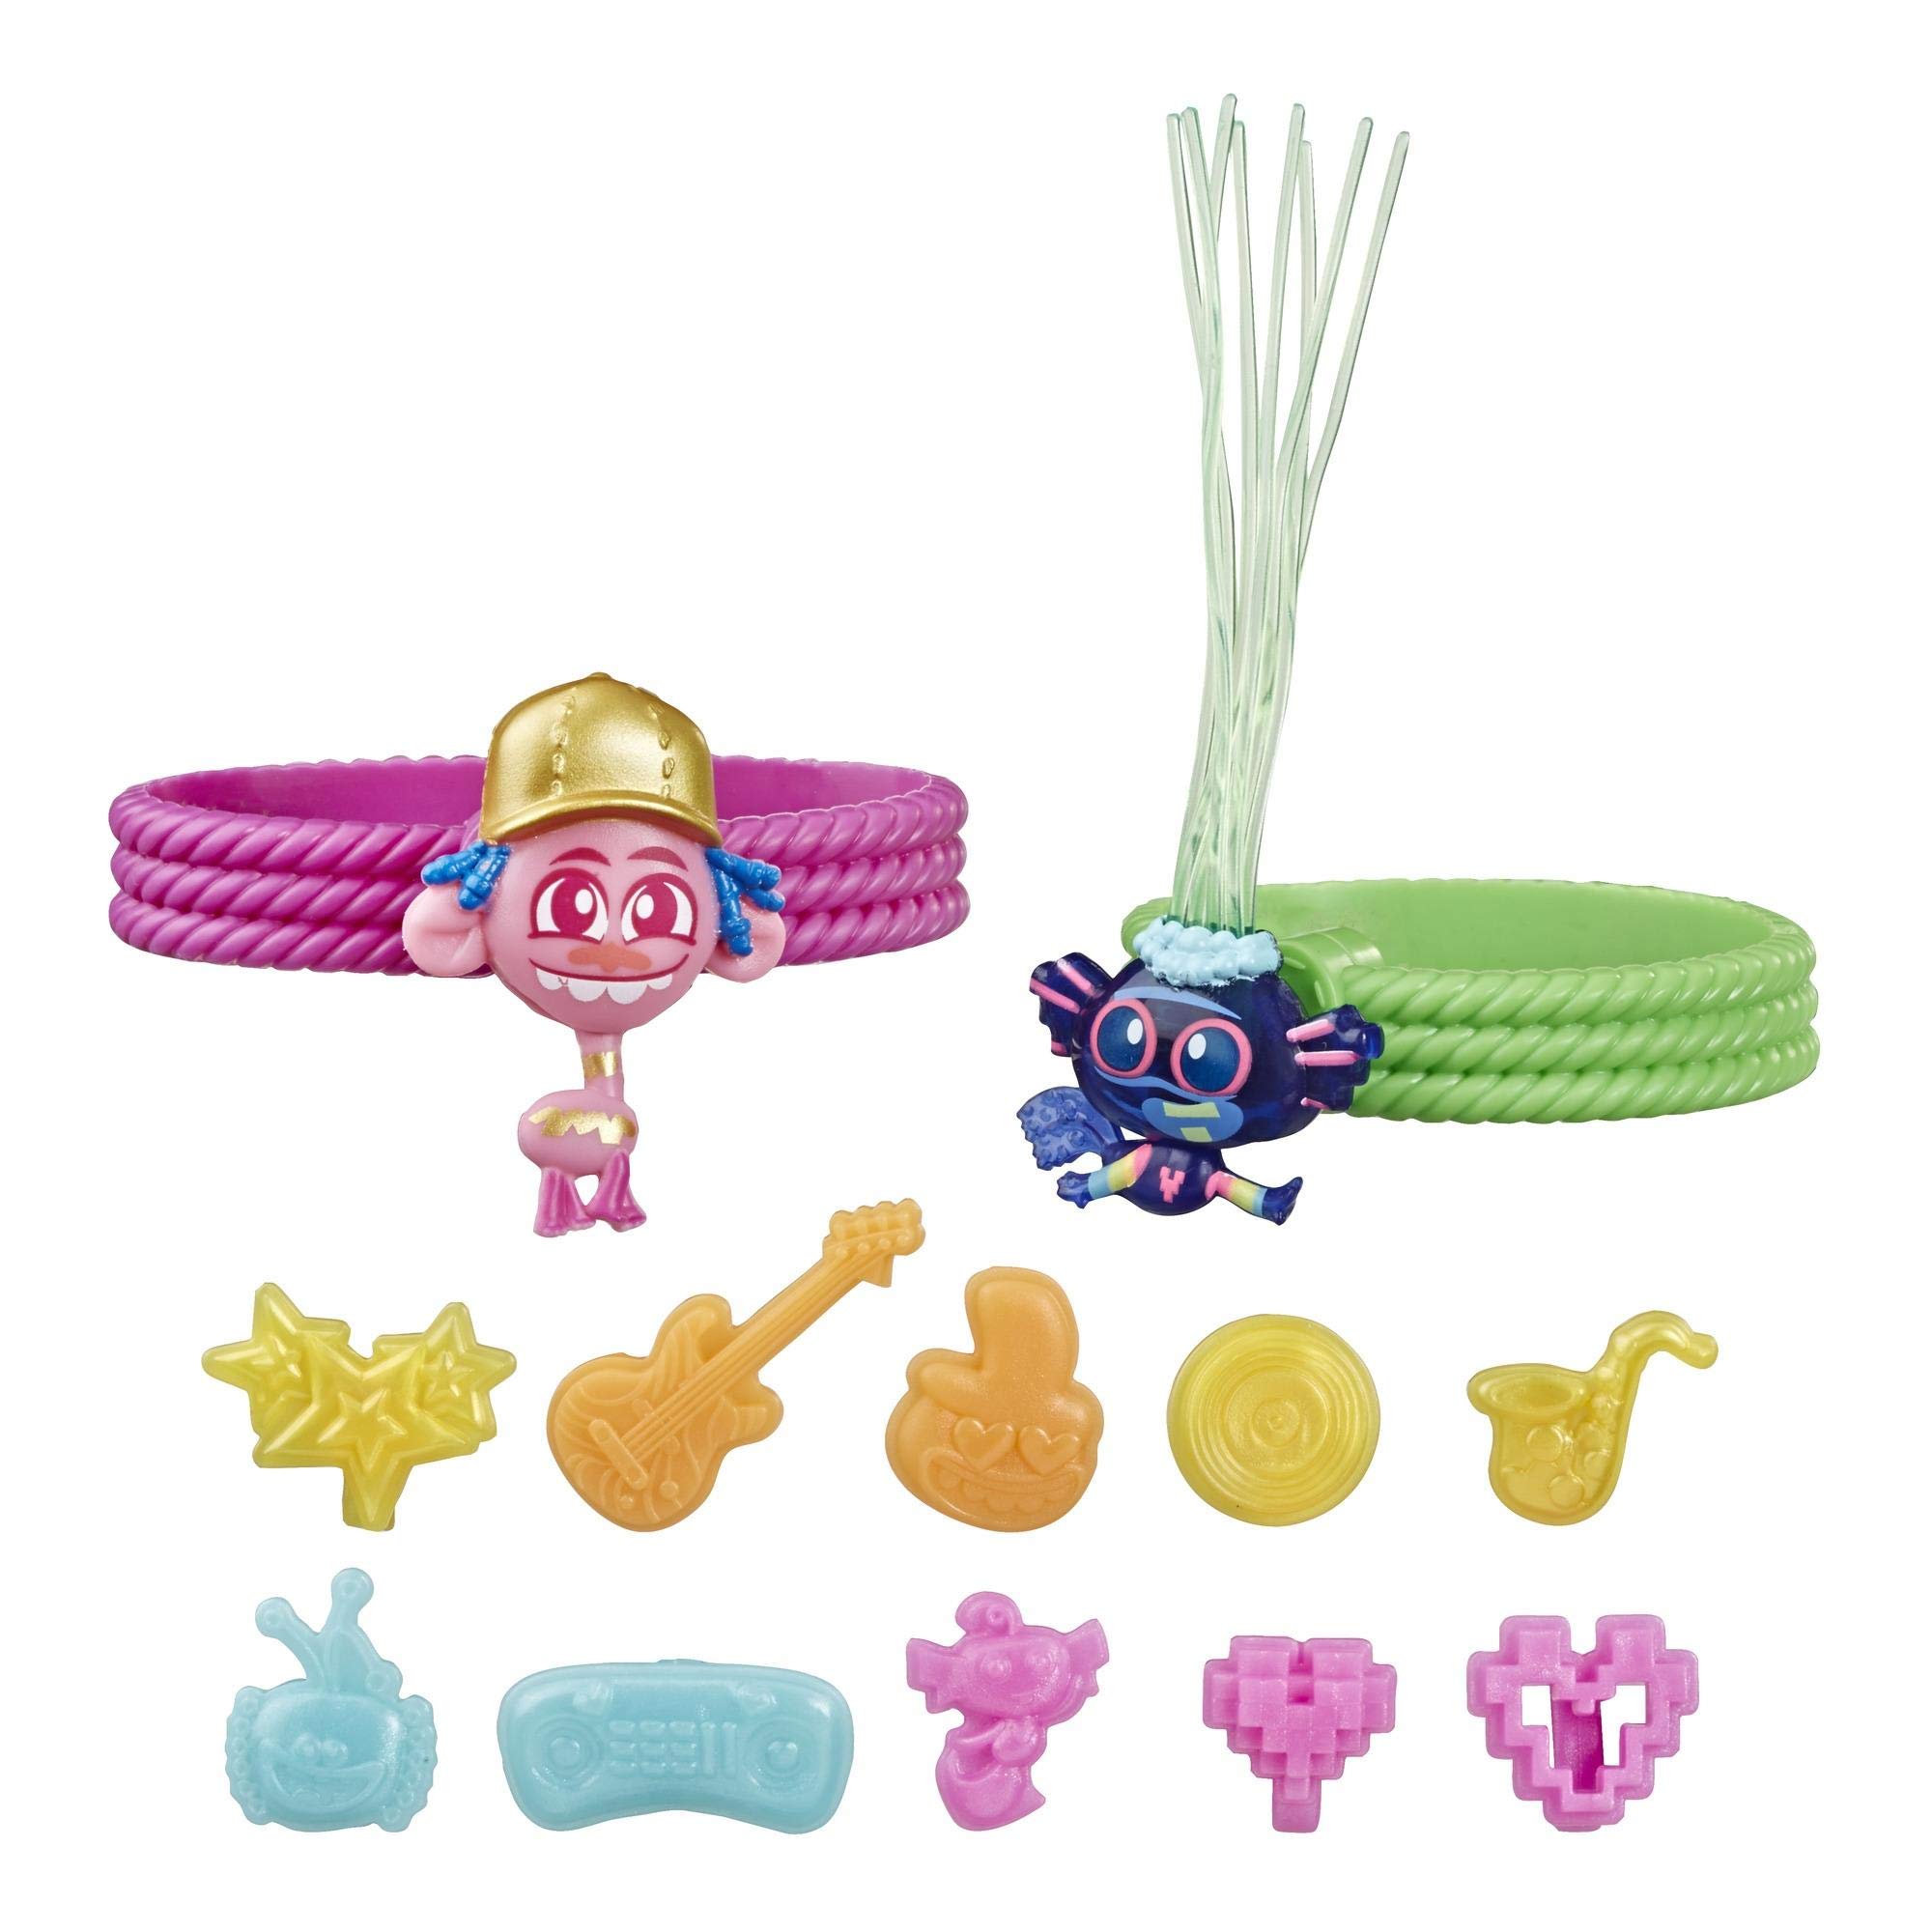 Trolls Hasbro DreamWorks Tiny Dancers Friend Pack with 2 Tiny Dancers Figures,2 Bracelets,and 10 Charms,Toy Inspired by The Movie World Tour